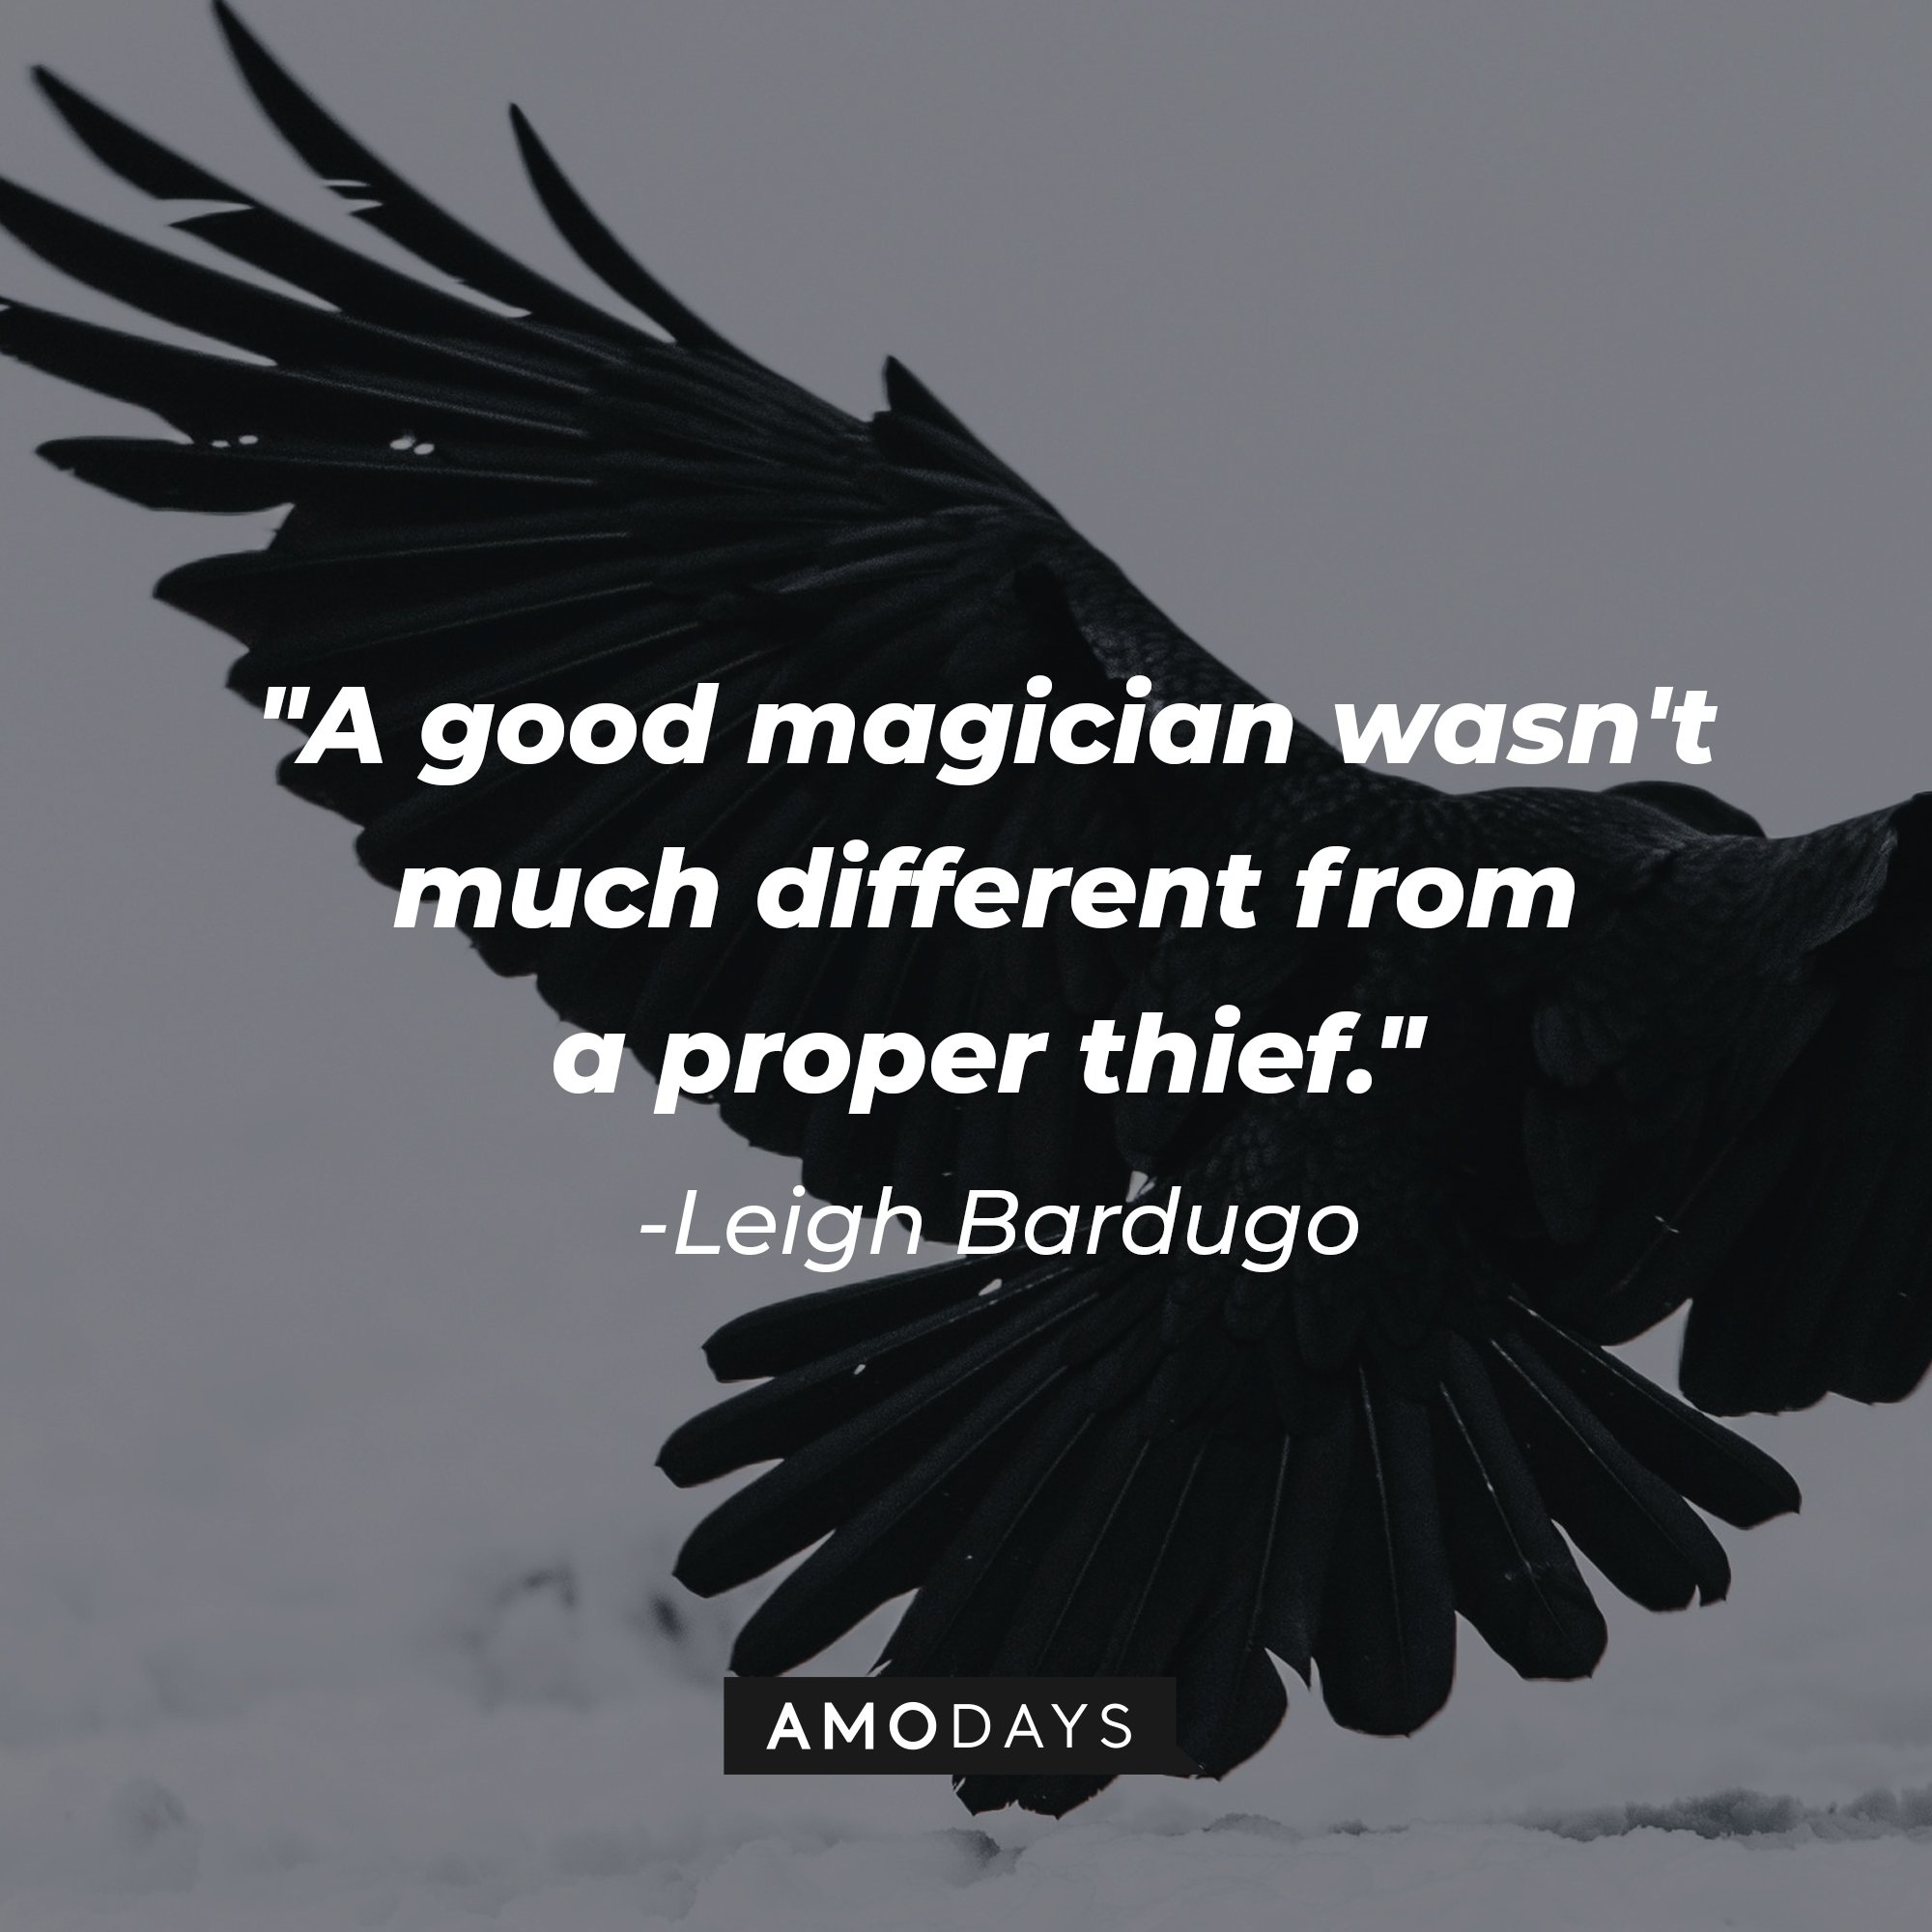 Leigh Bardugo’s quote: "A good magician wasn't much different from a proper thief."  | Image: AmoDays